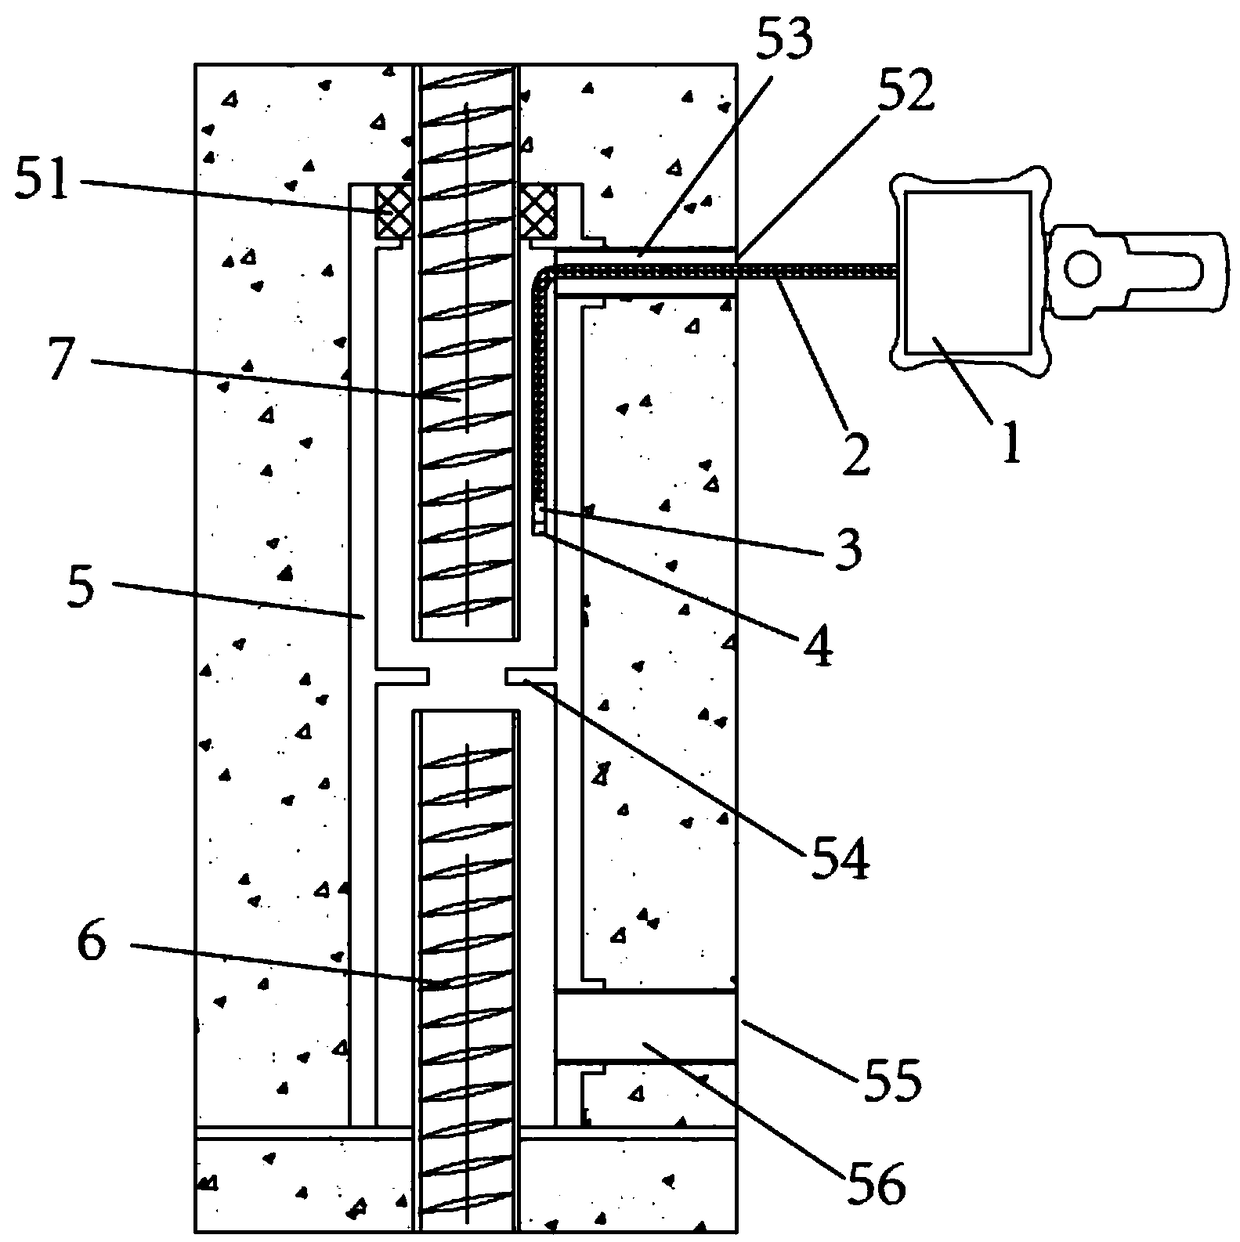 A method for detecting the insertion depth of connecting steel bars in fully grouted sleeve steel bar joints